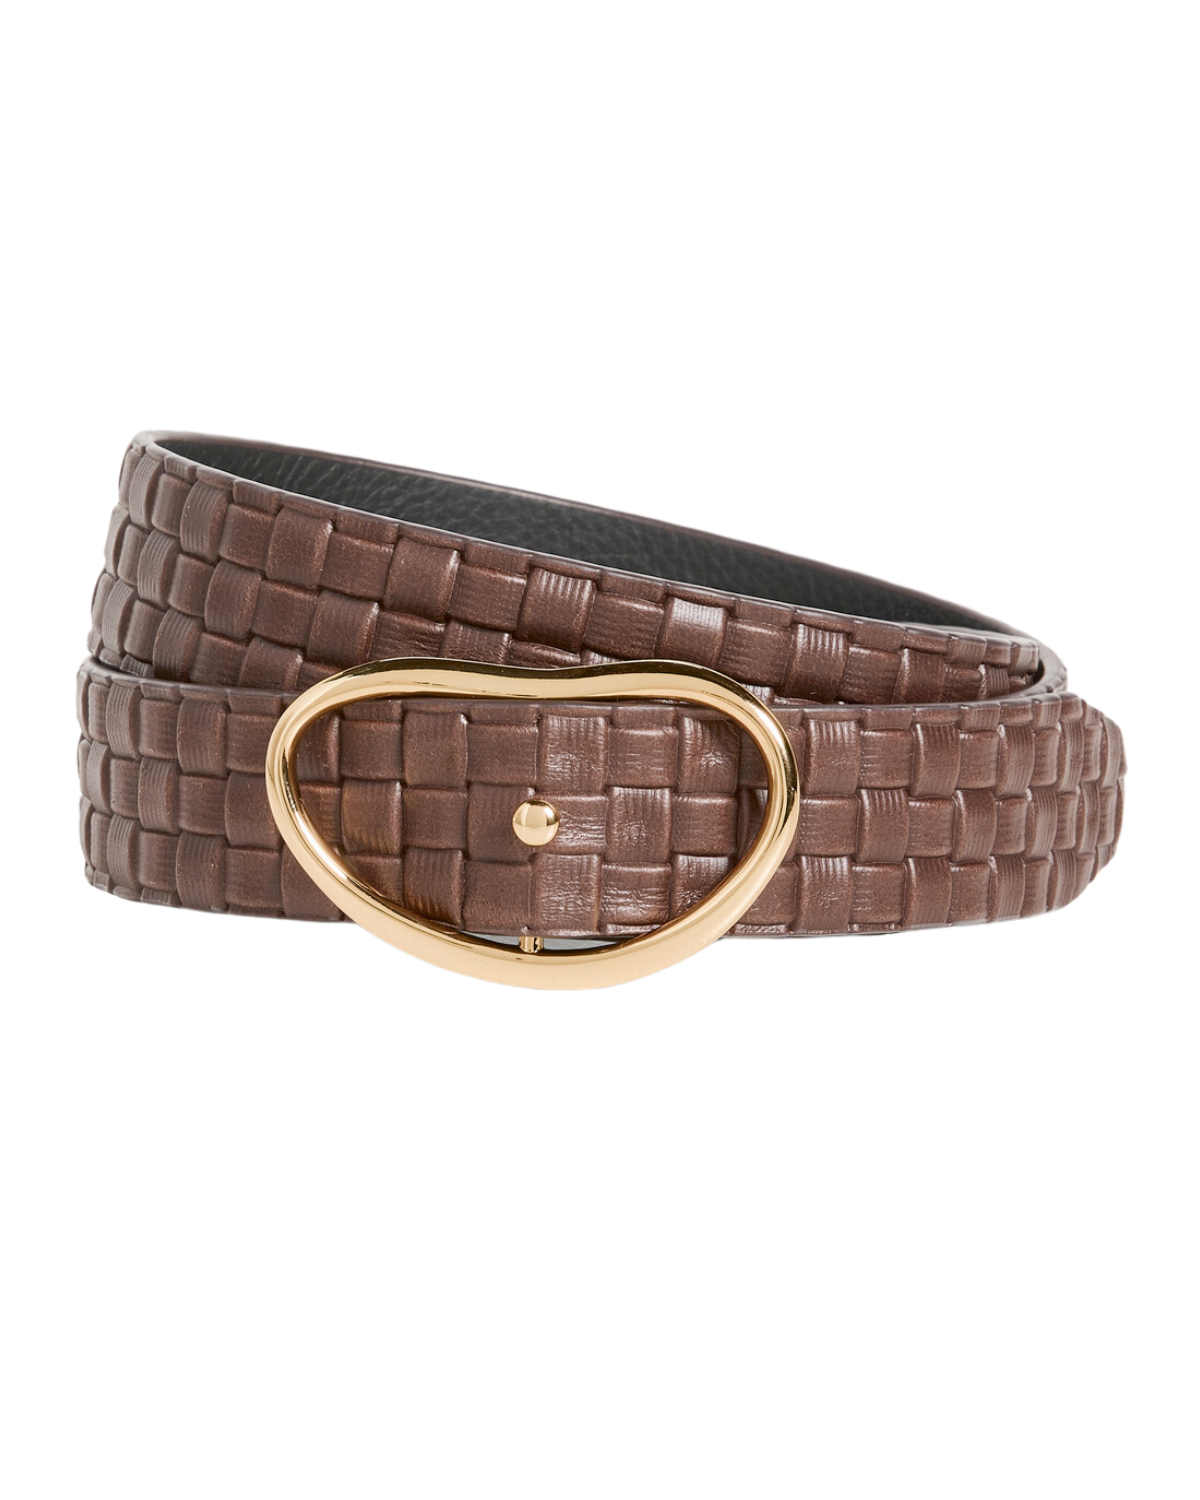 Wide Georgia Belt with Gold Buckle (Woven Espresso)